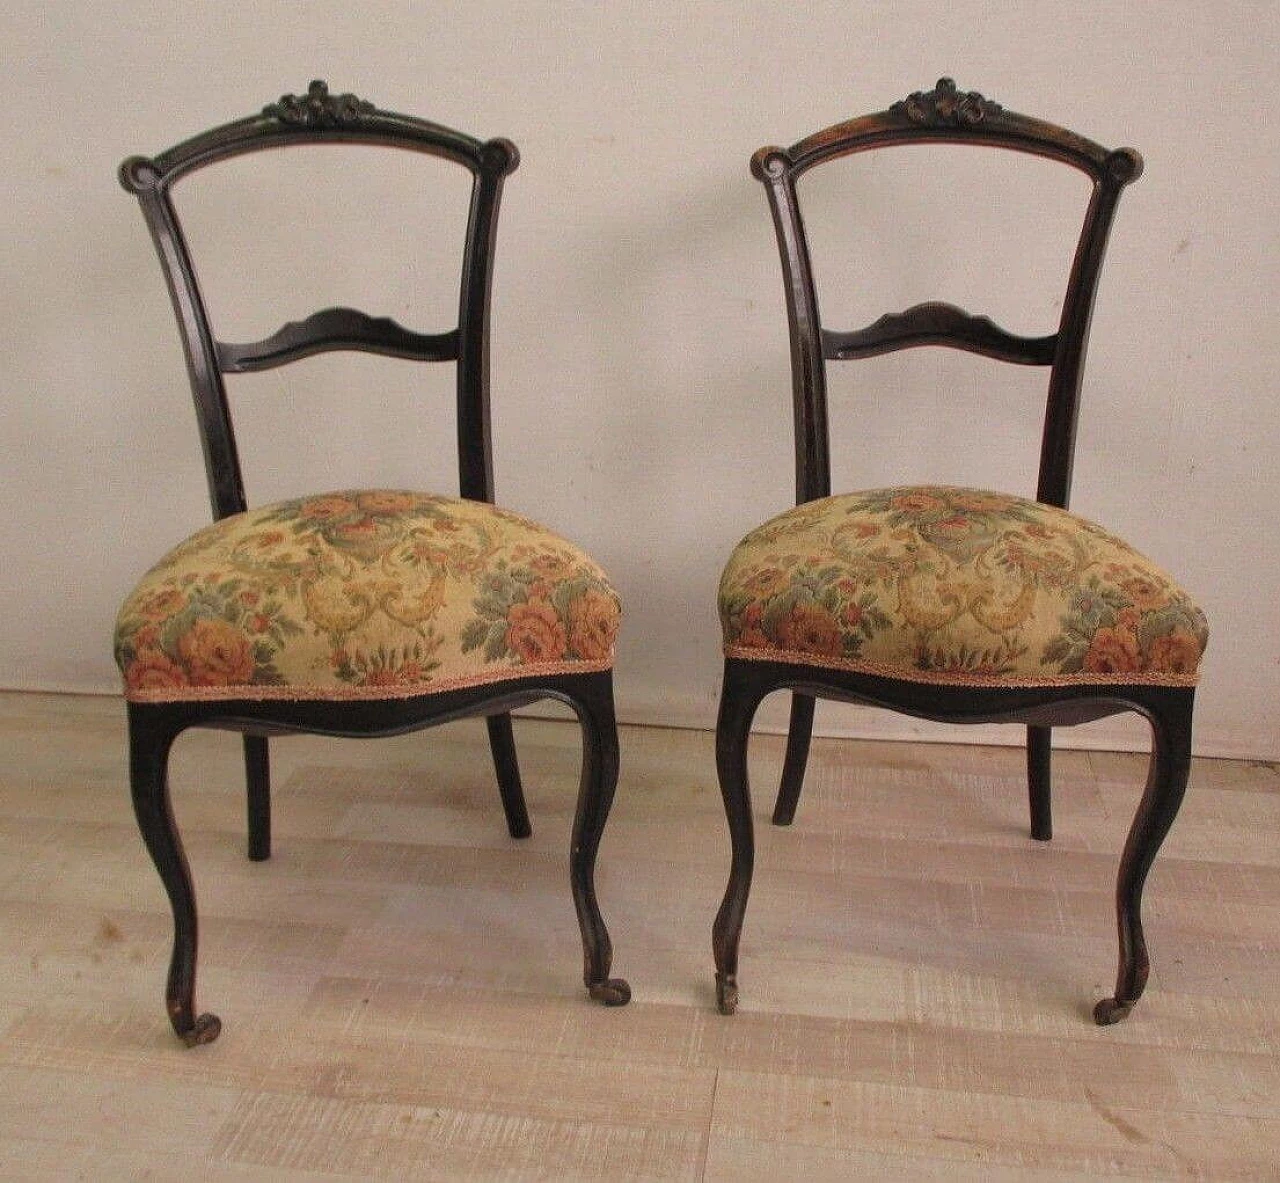 Pair of Umbertine chairs with casters in ebonised solid walnut and Gobelin fabric, 19th century 11